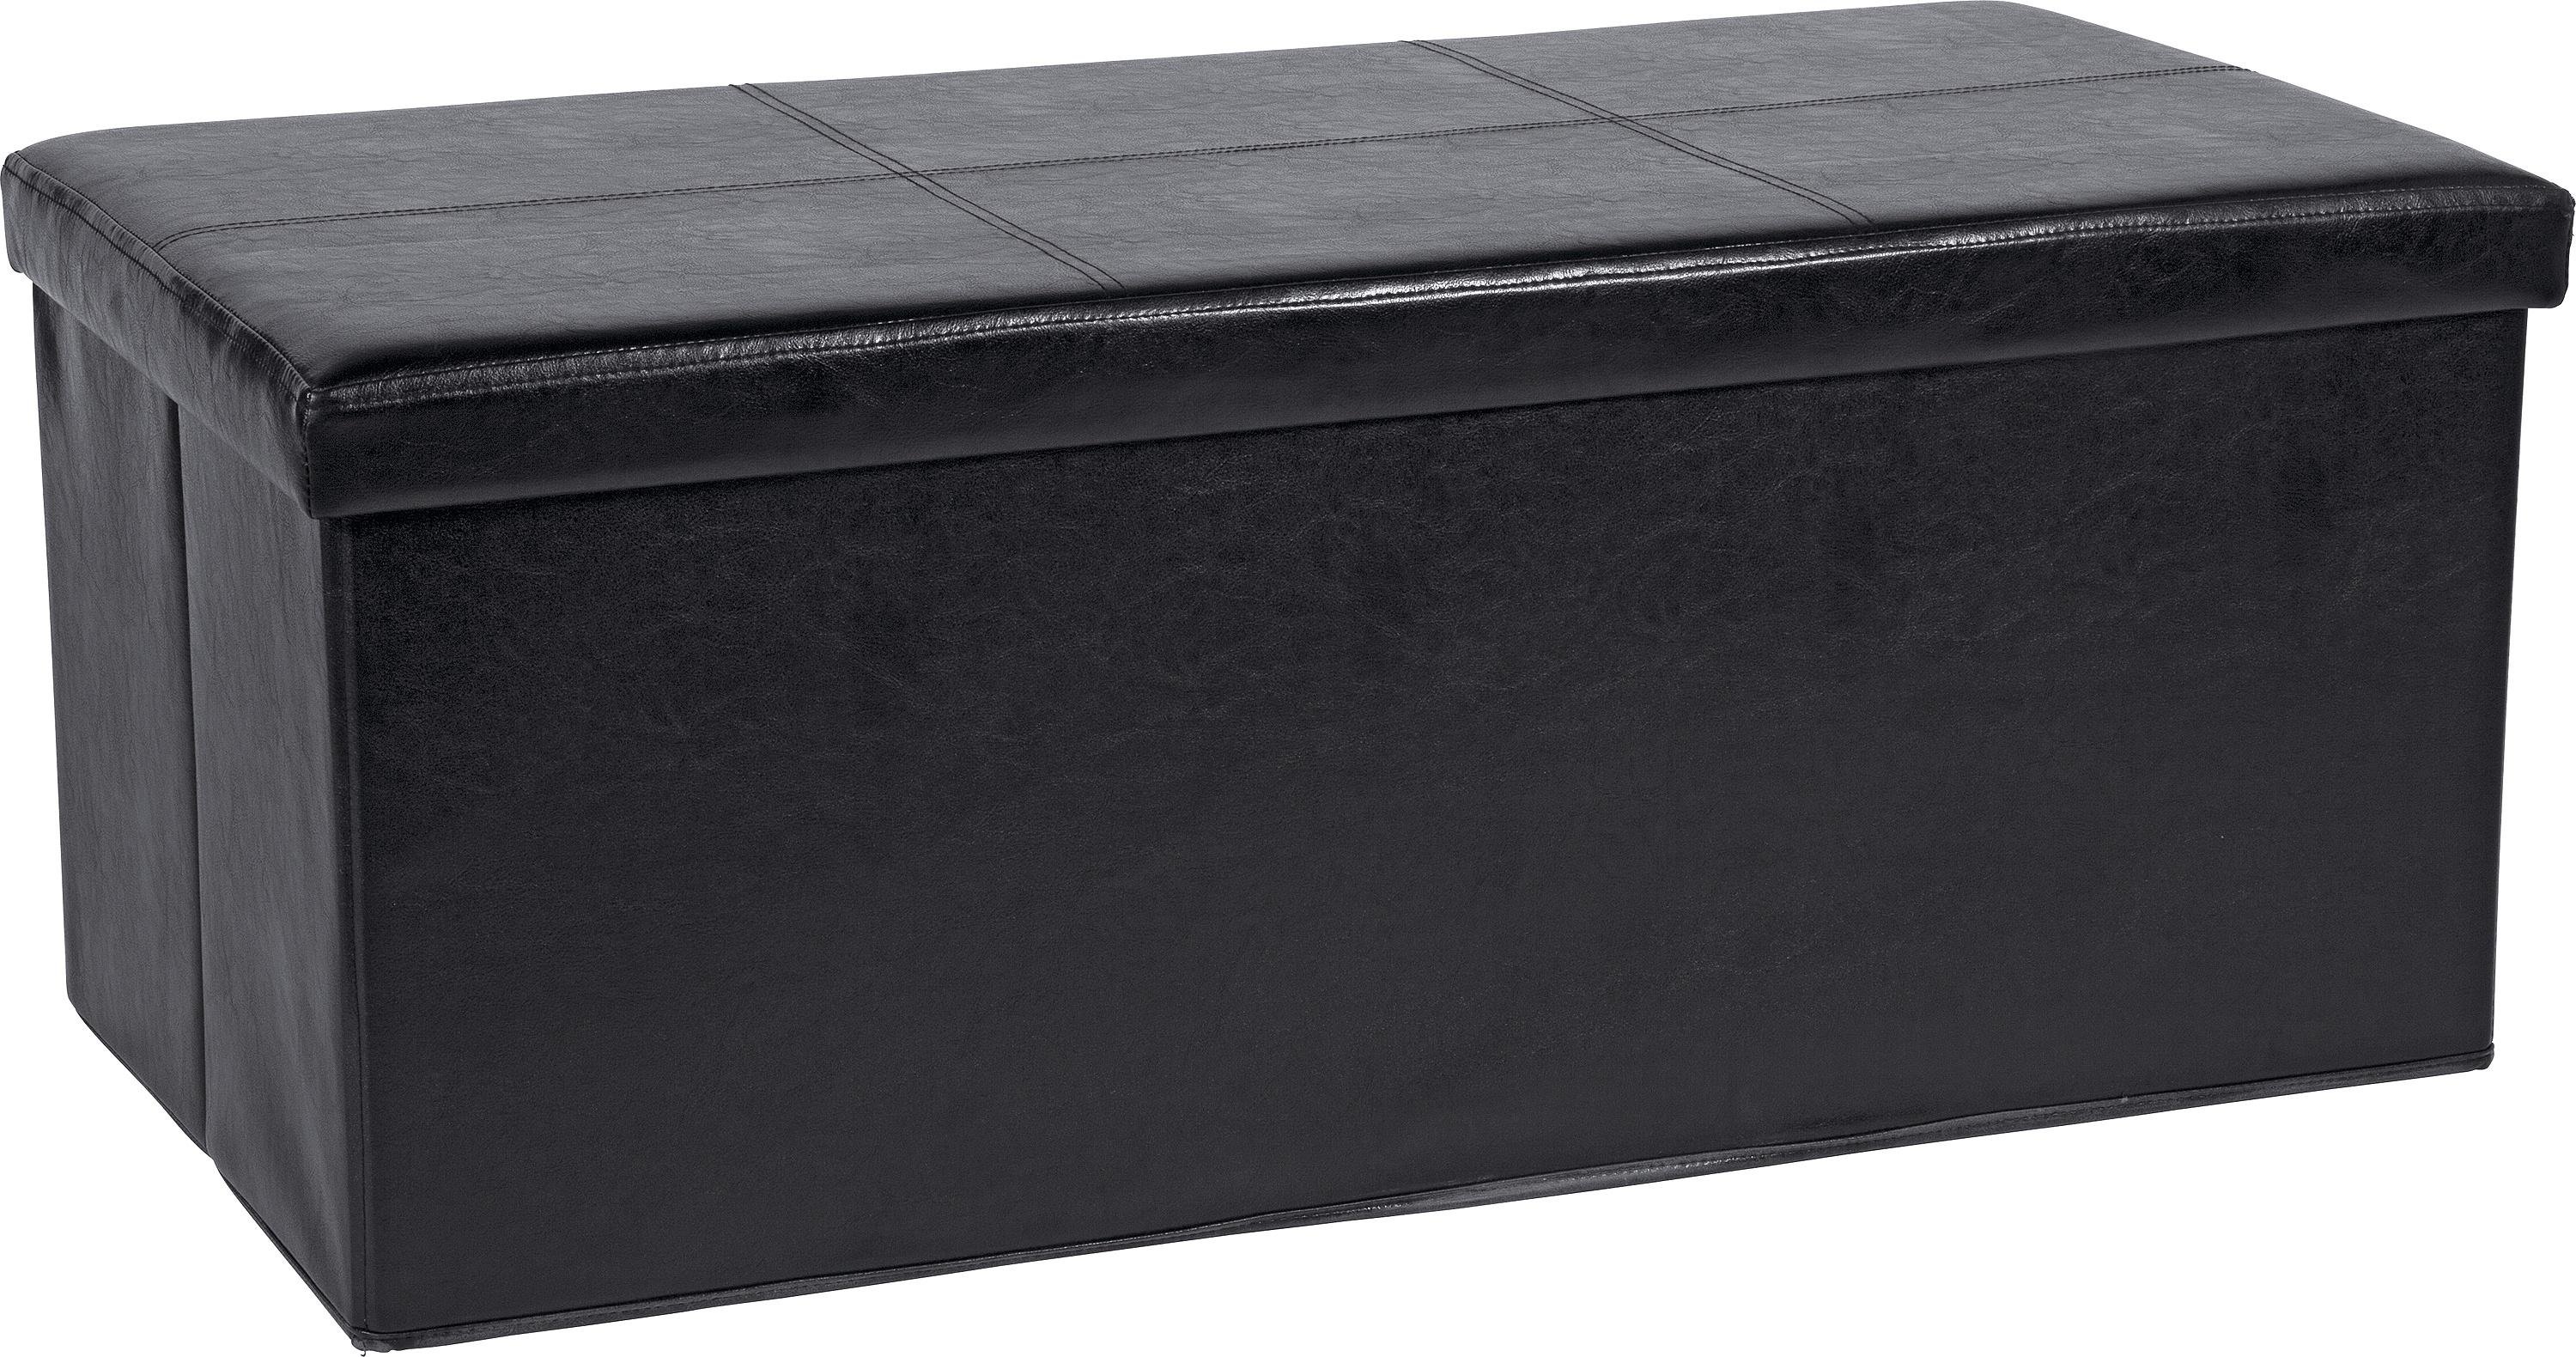 HOME XL Leather Effect Ottoman with Stitching Detail Review